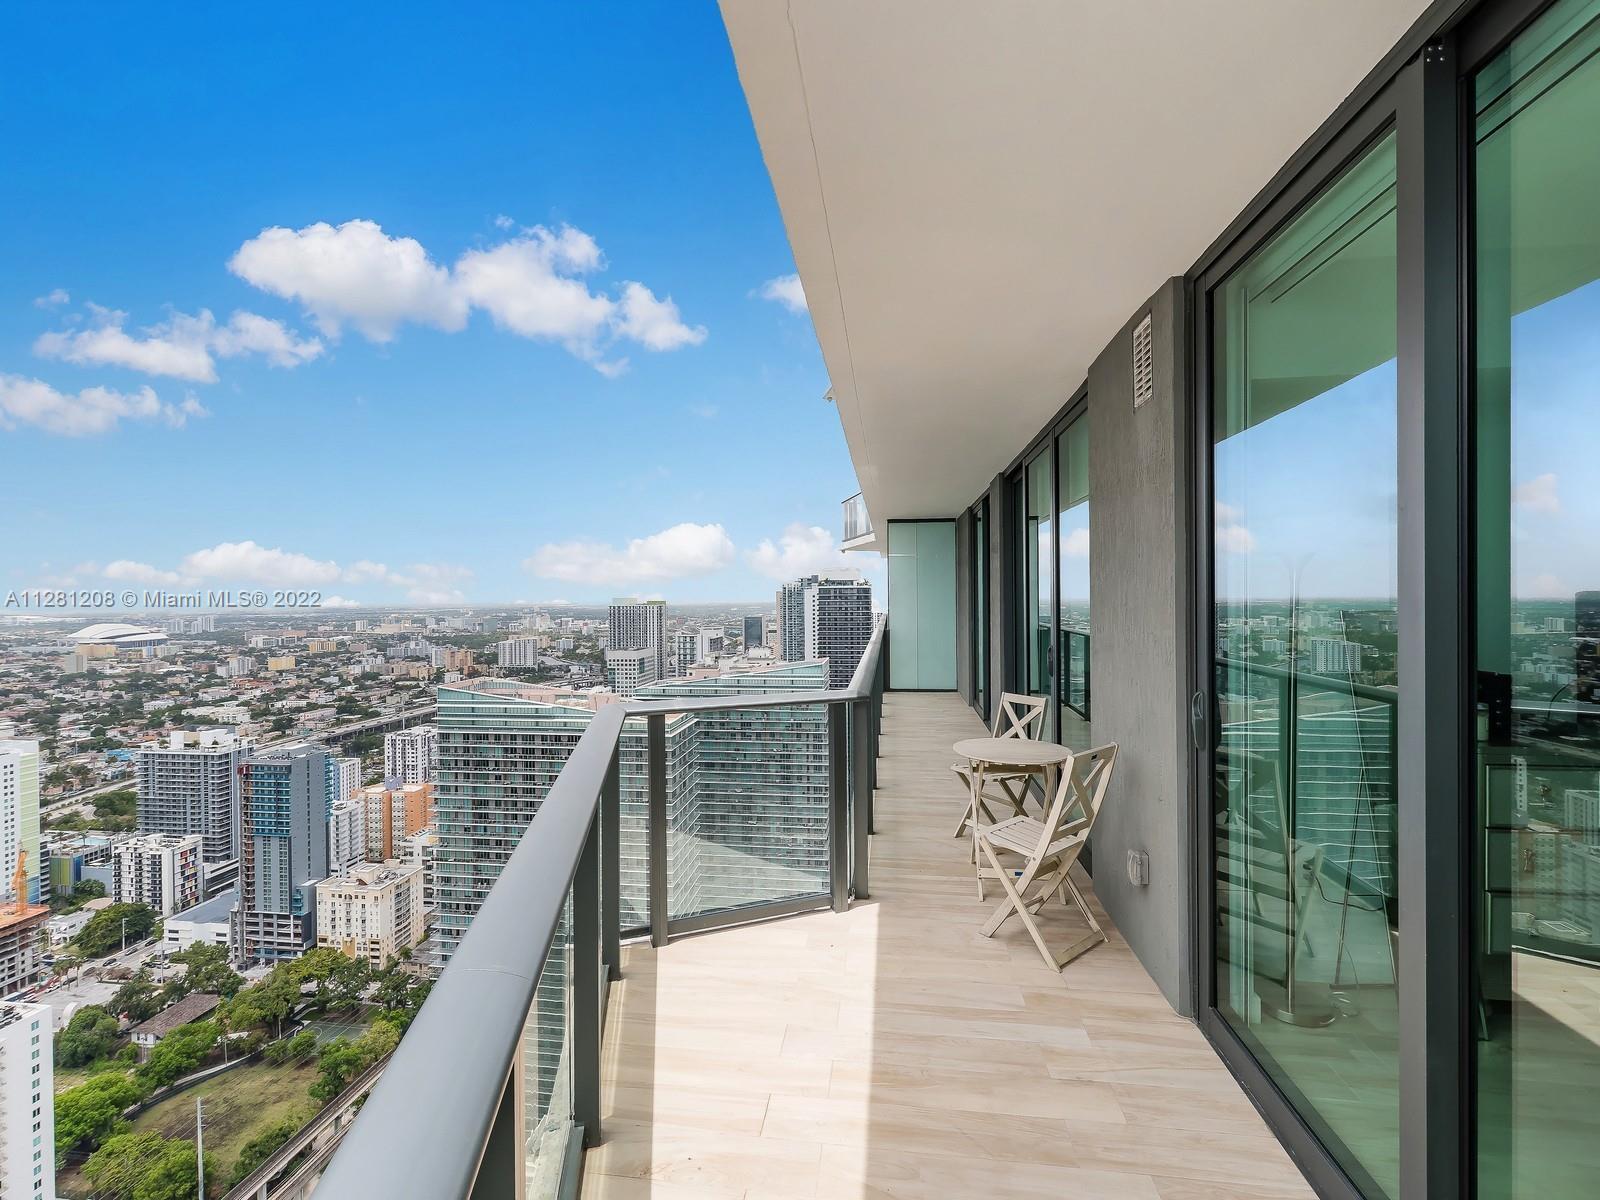 Enjoy the amenities of 5 stars SLS hotel and access to the most prestigious beach club in Miami. Beautiful 2 beds, 2 bathrooms, Italian cabinets, BOSH stainless steel appliances. One of the best parking spots on the fifth floor. Unit has white interior closets, shades and block outs.